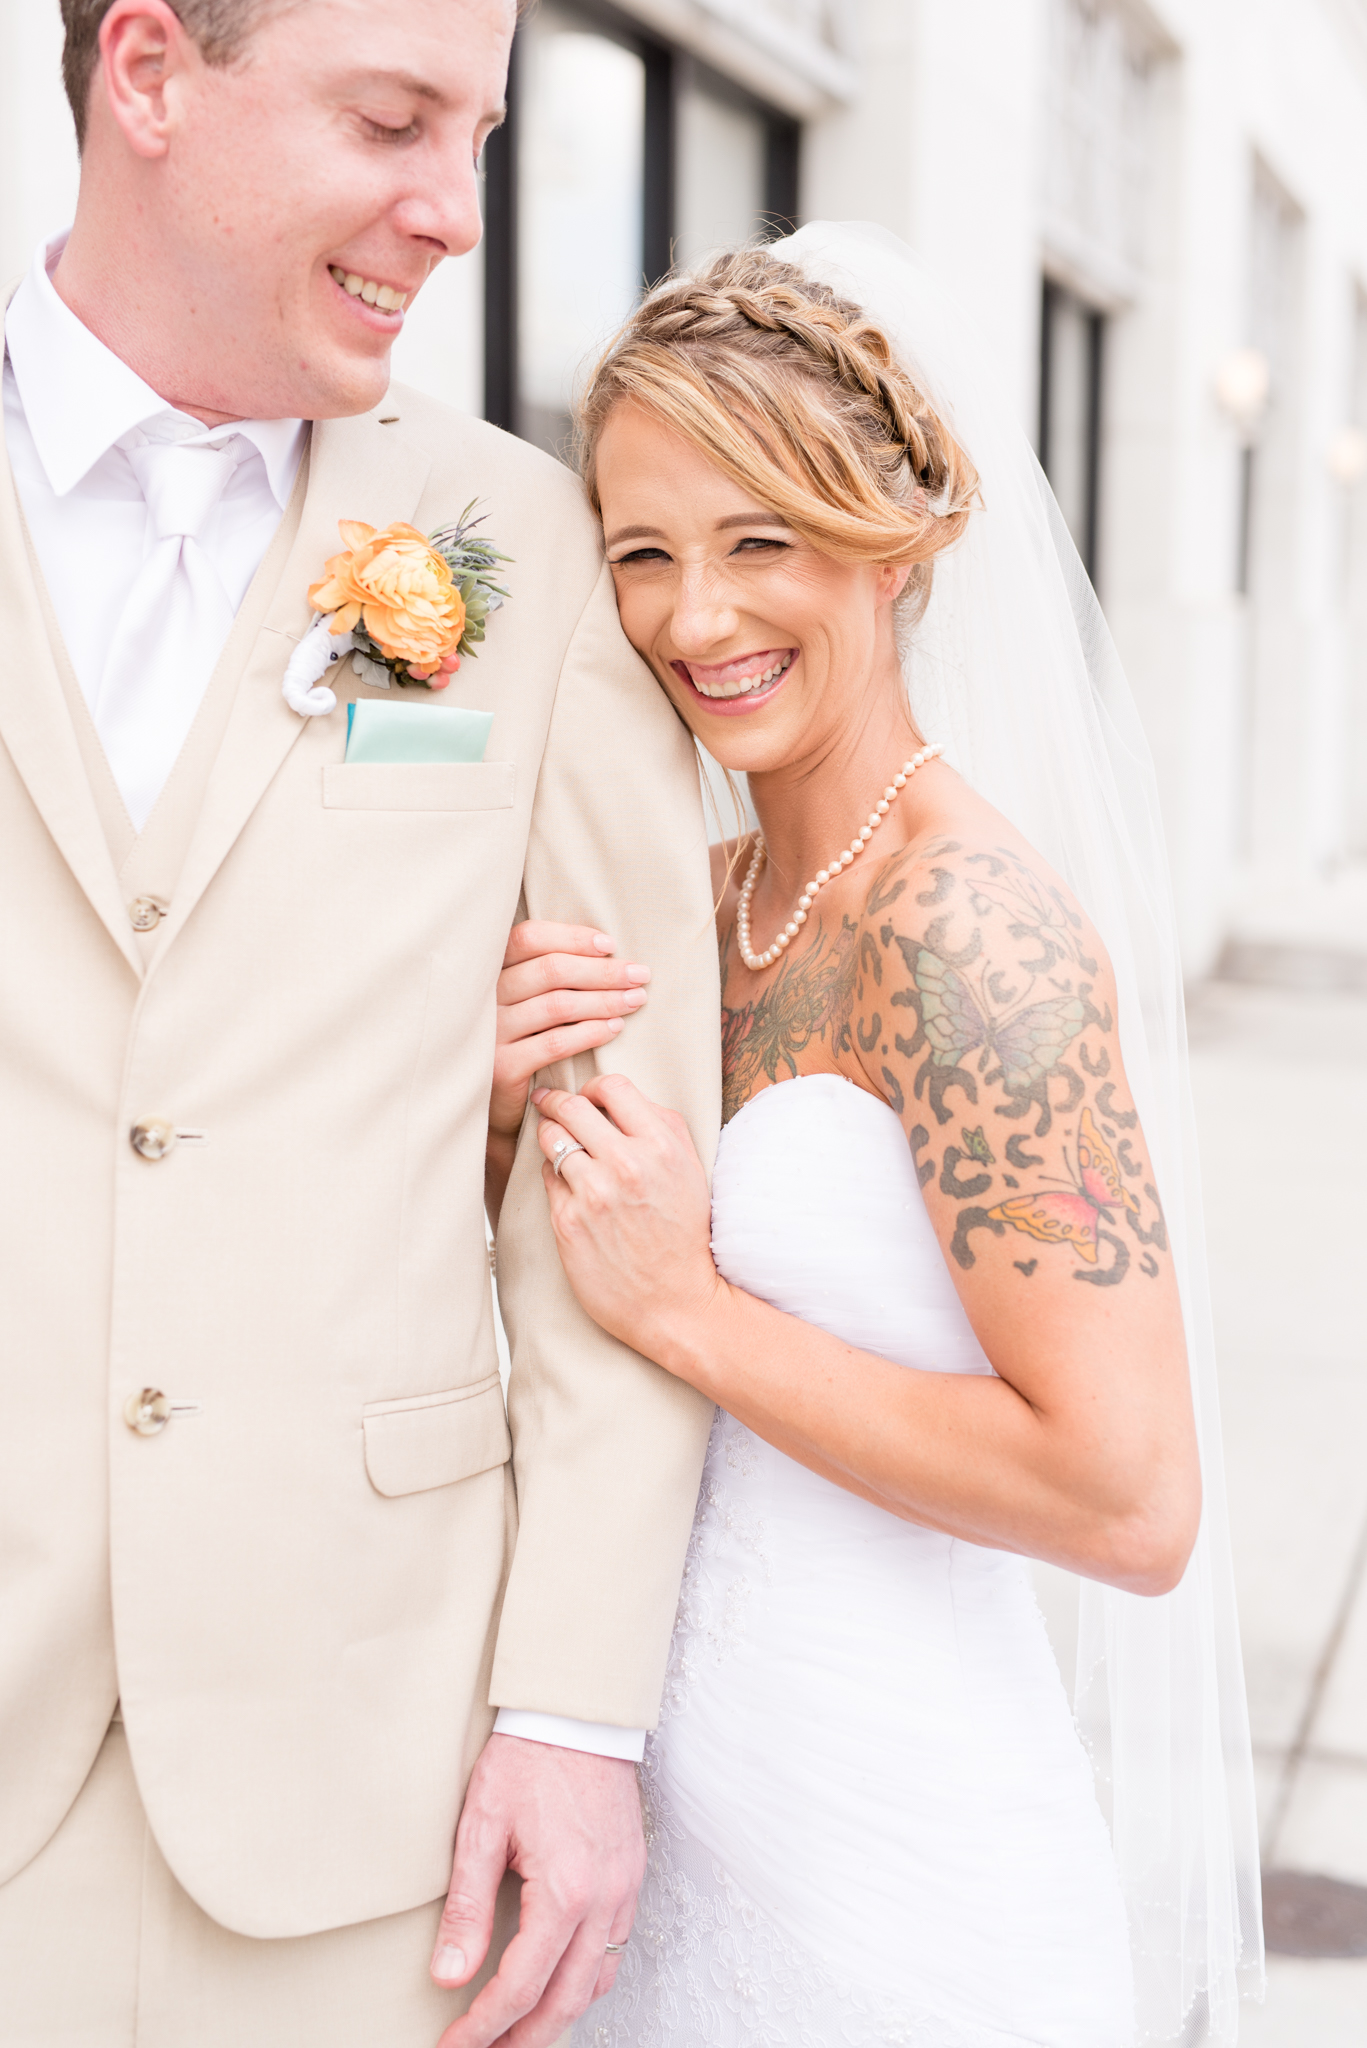 Bride laughs as she holds onto groom's arm.